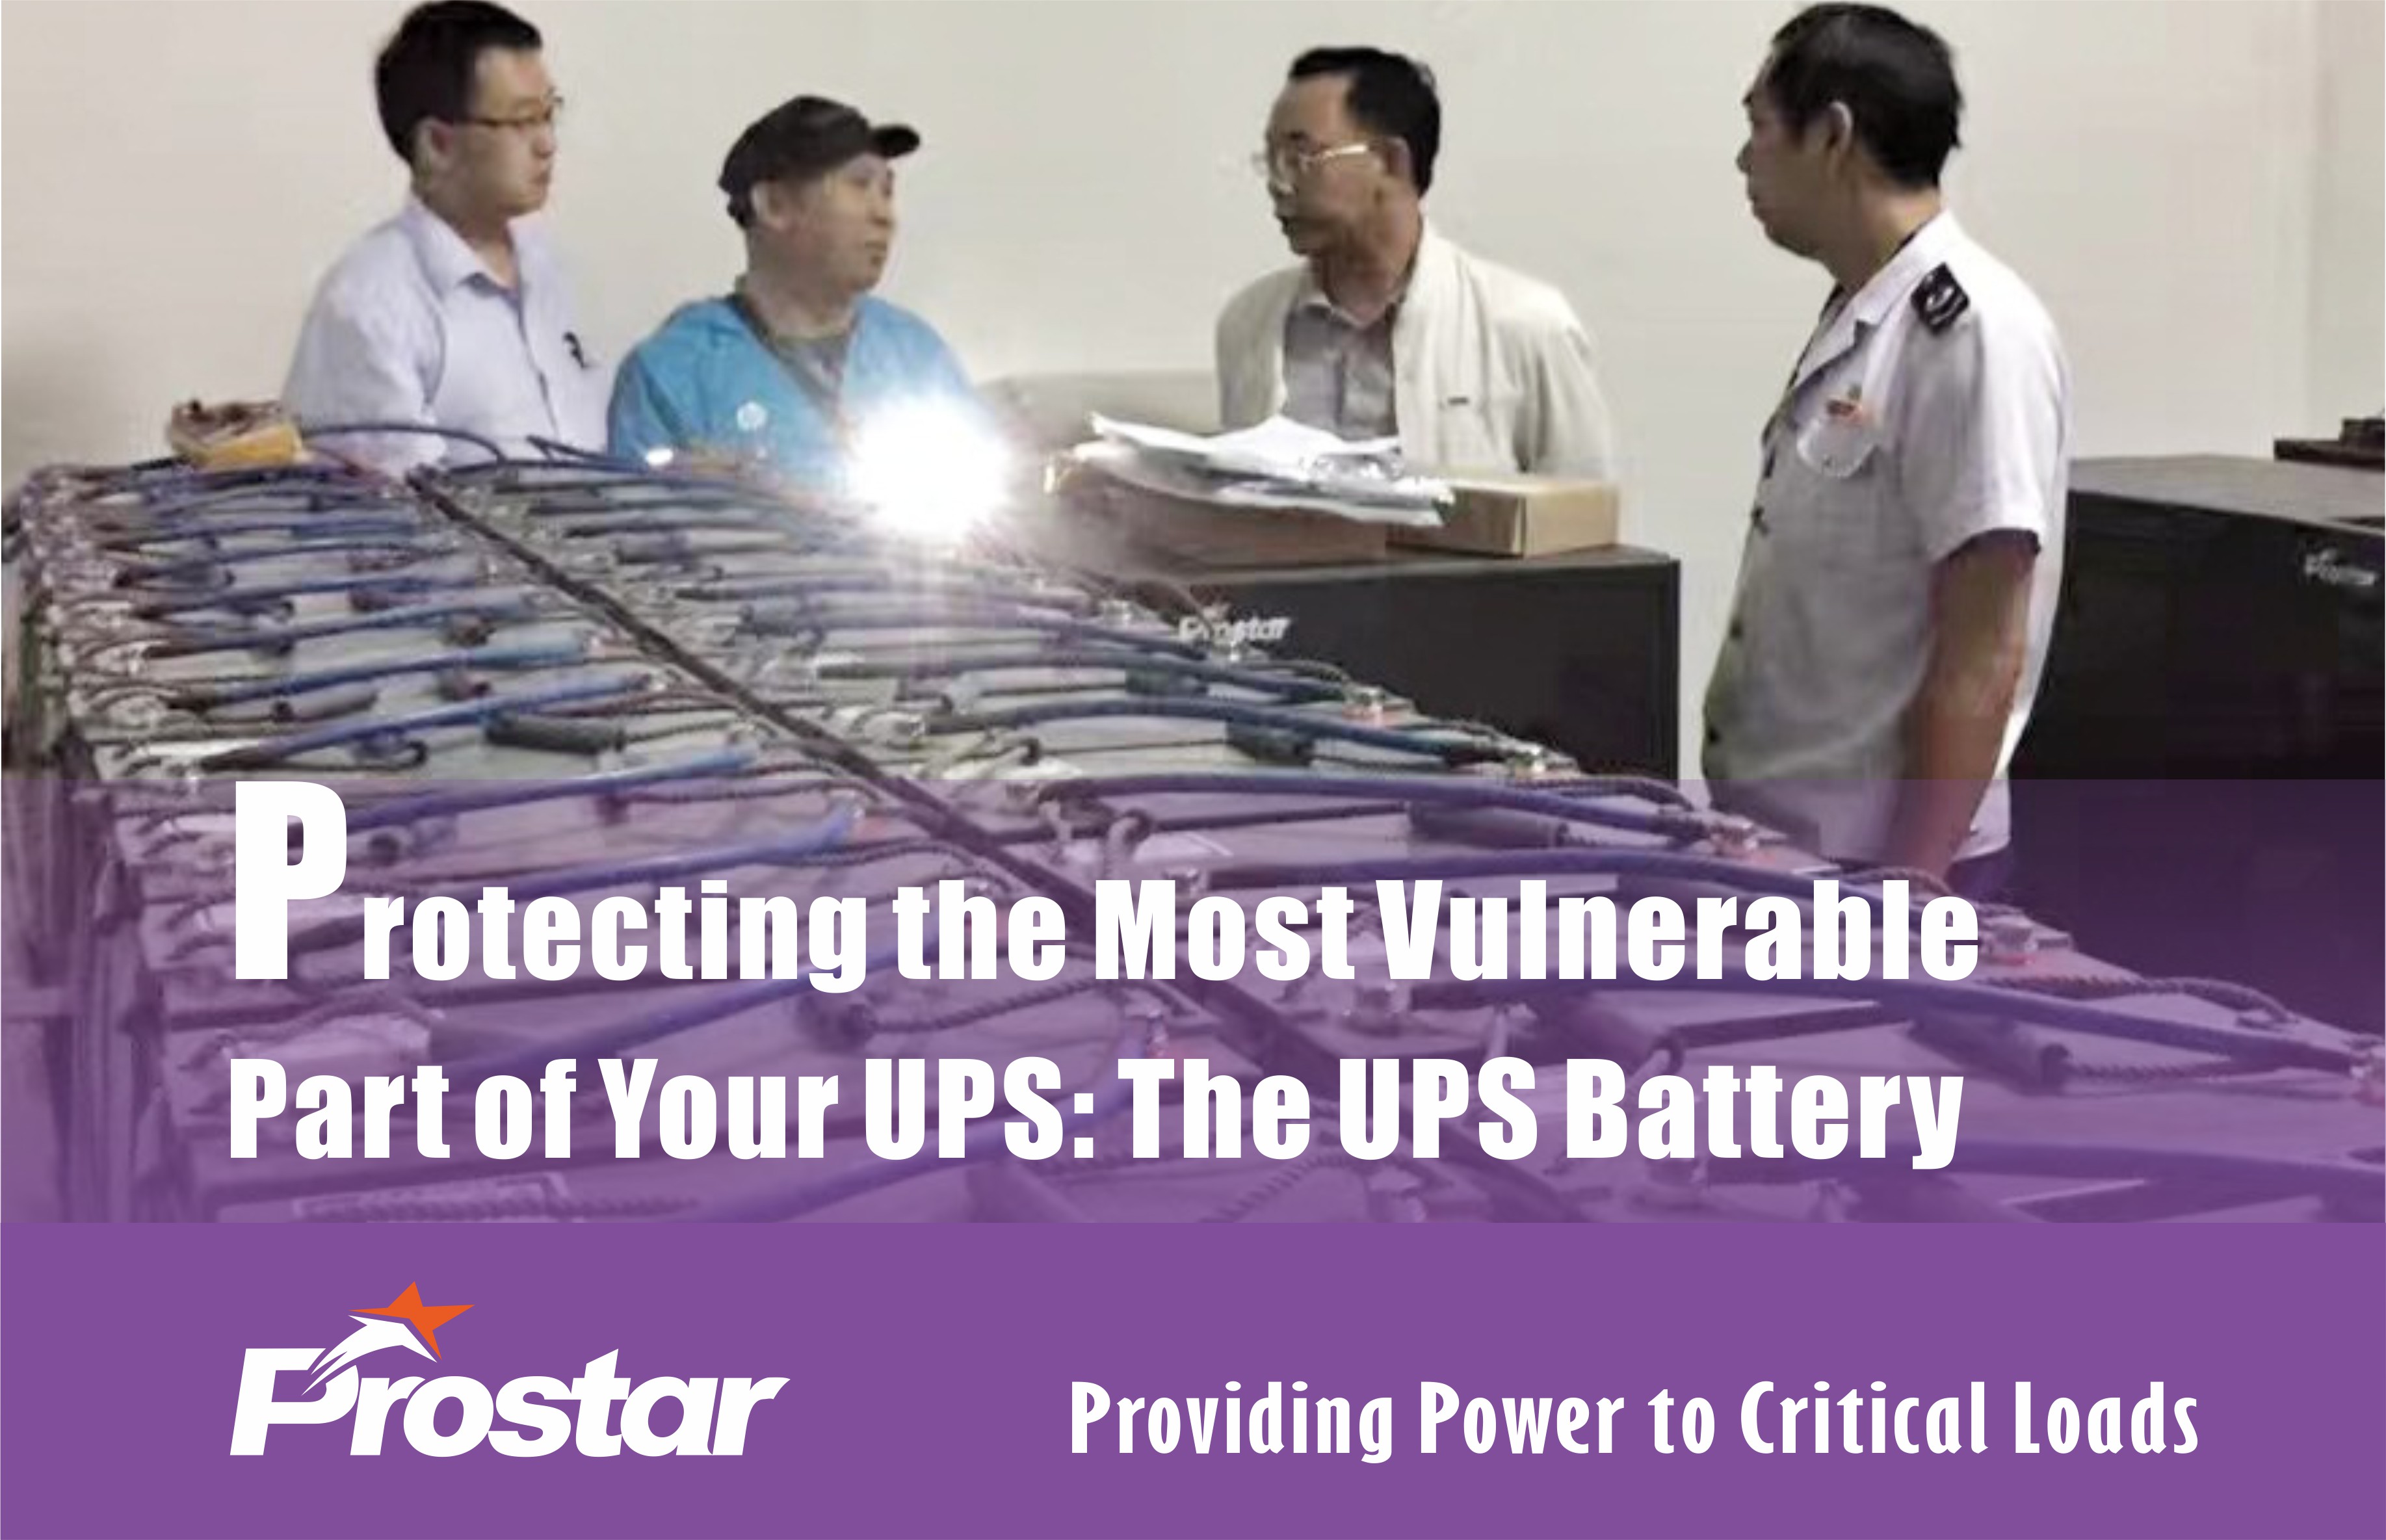 Protecting the Most Vulnerable Part of Your UPS: The UPS Battery